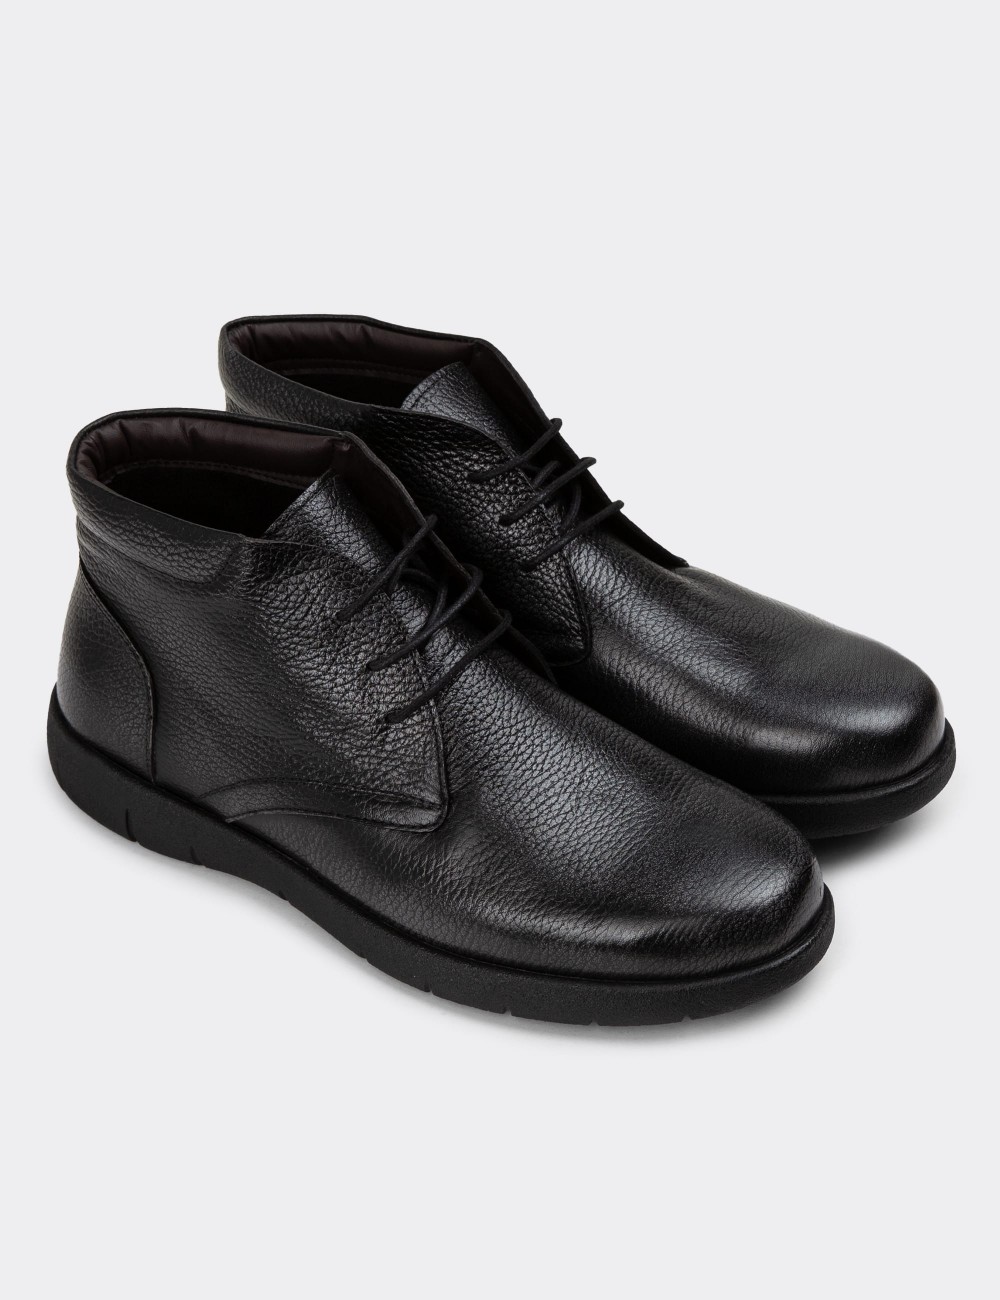 Anthracite Leather Boots - 01970MANTC01